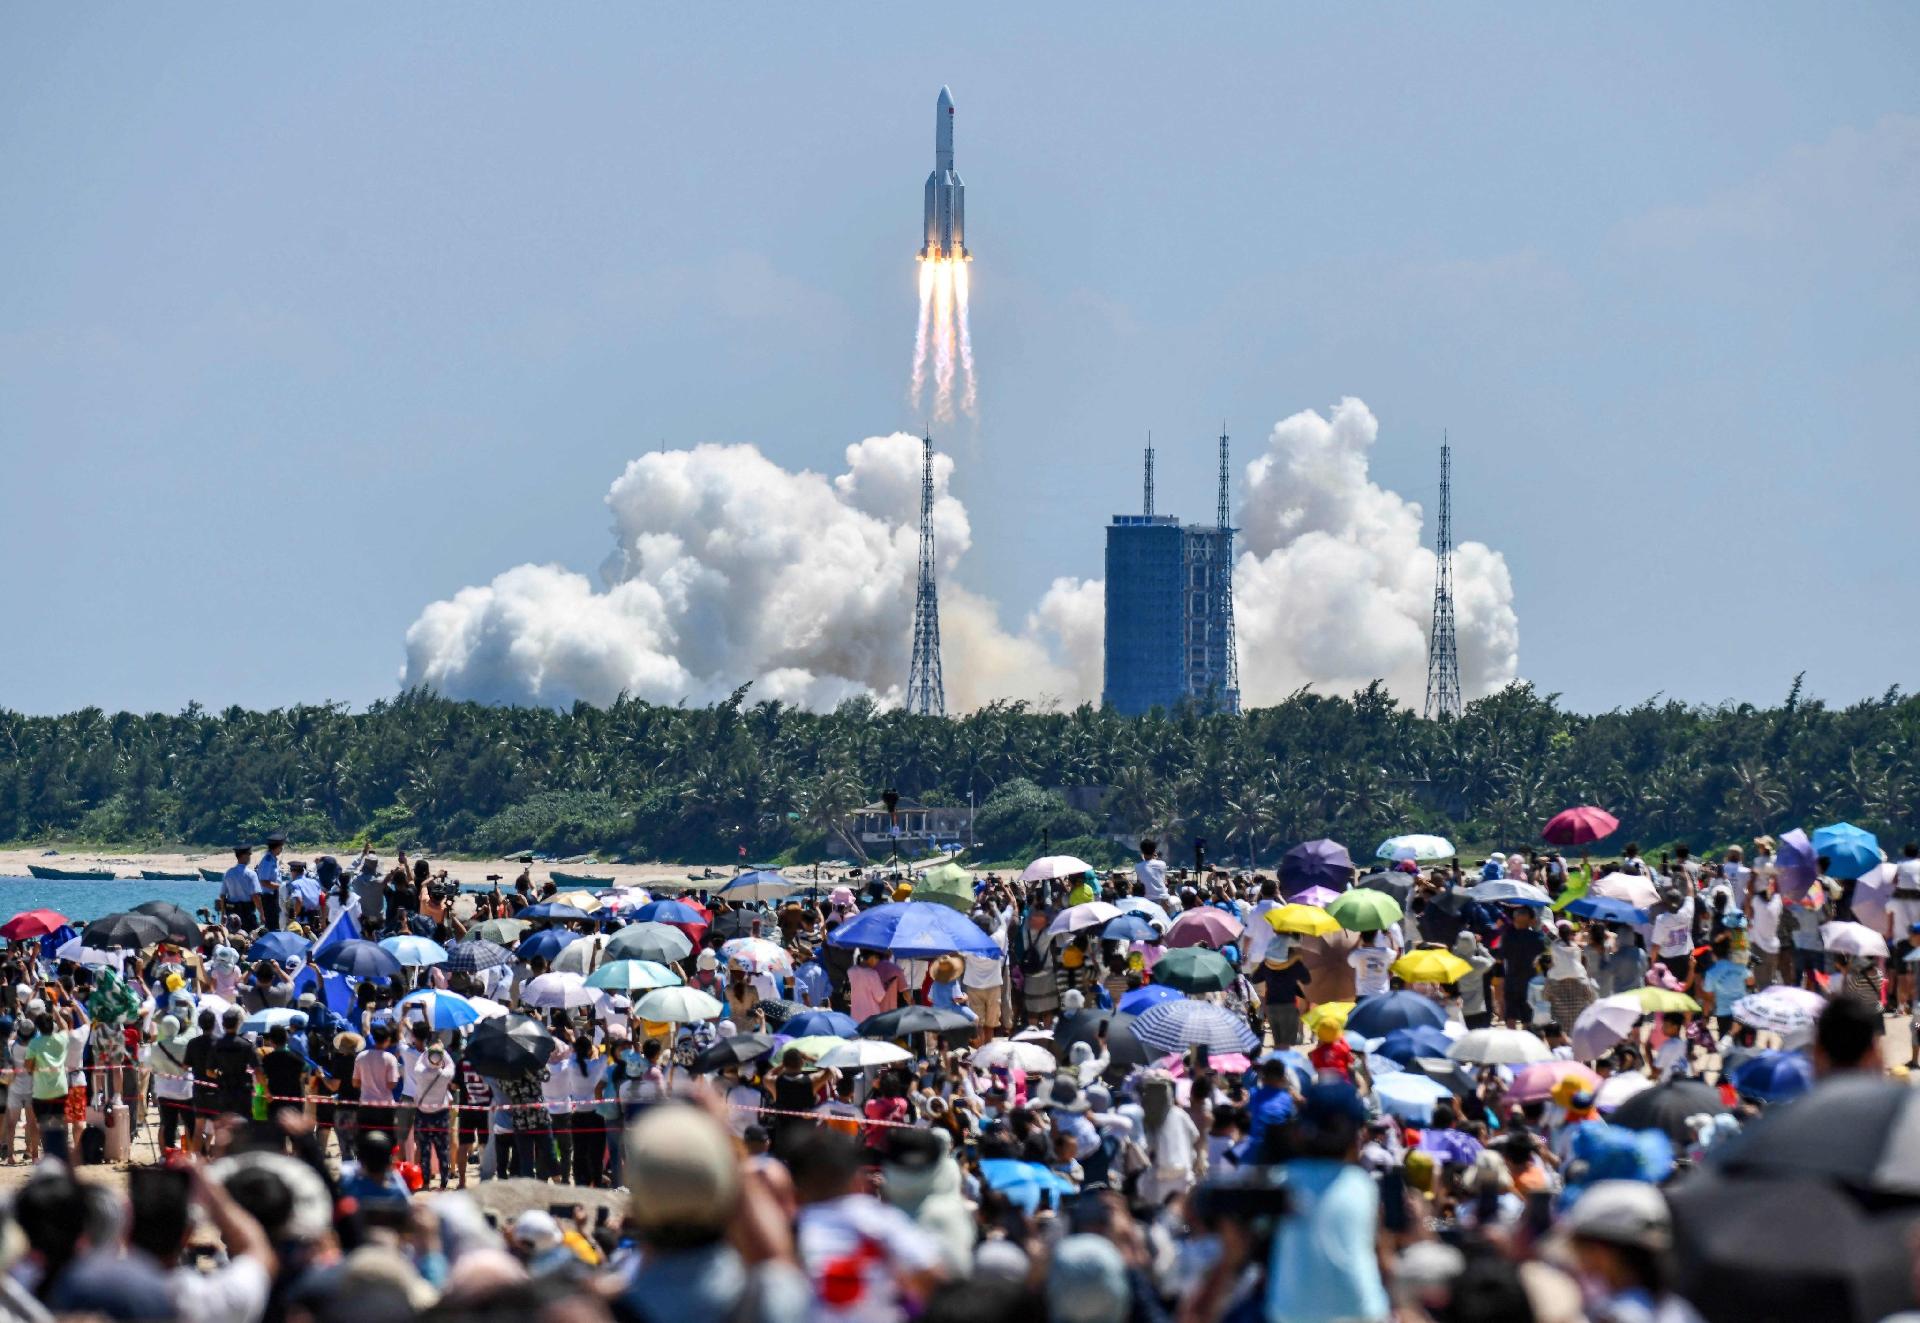 24.Jul.2022 - Hundreds of people watch the launch of the second module of the Tiangong Space Station (